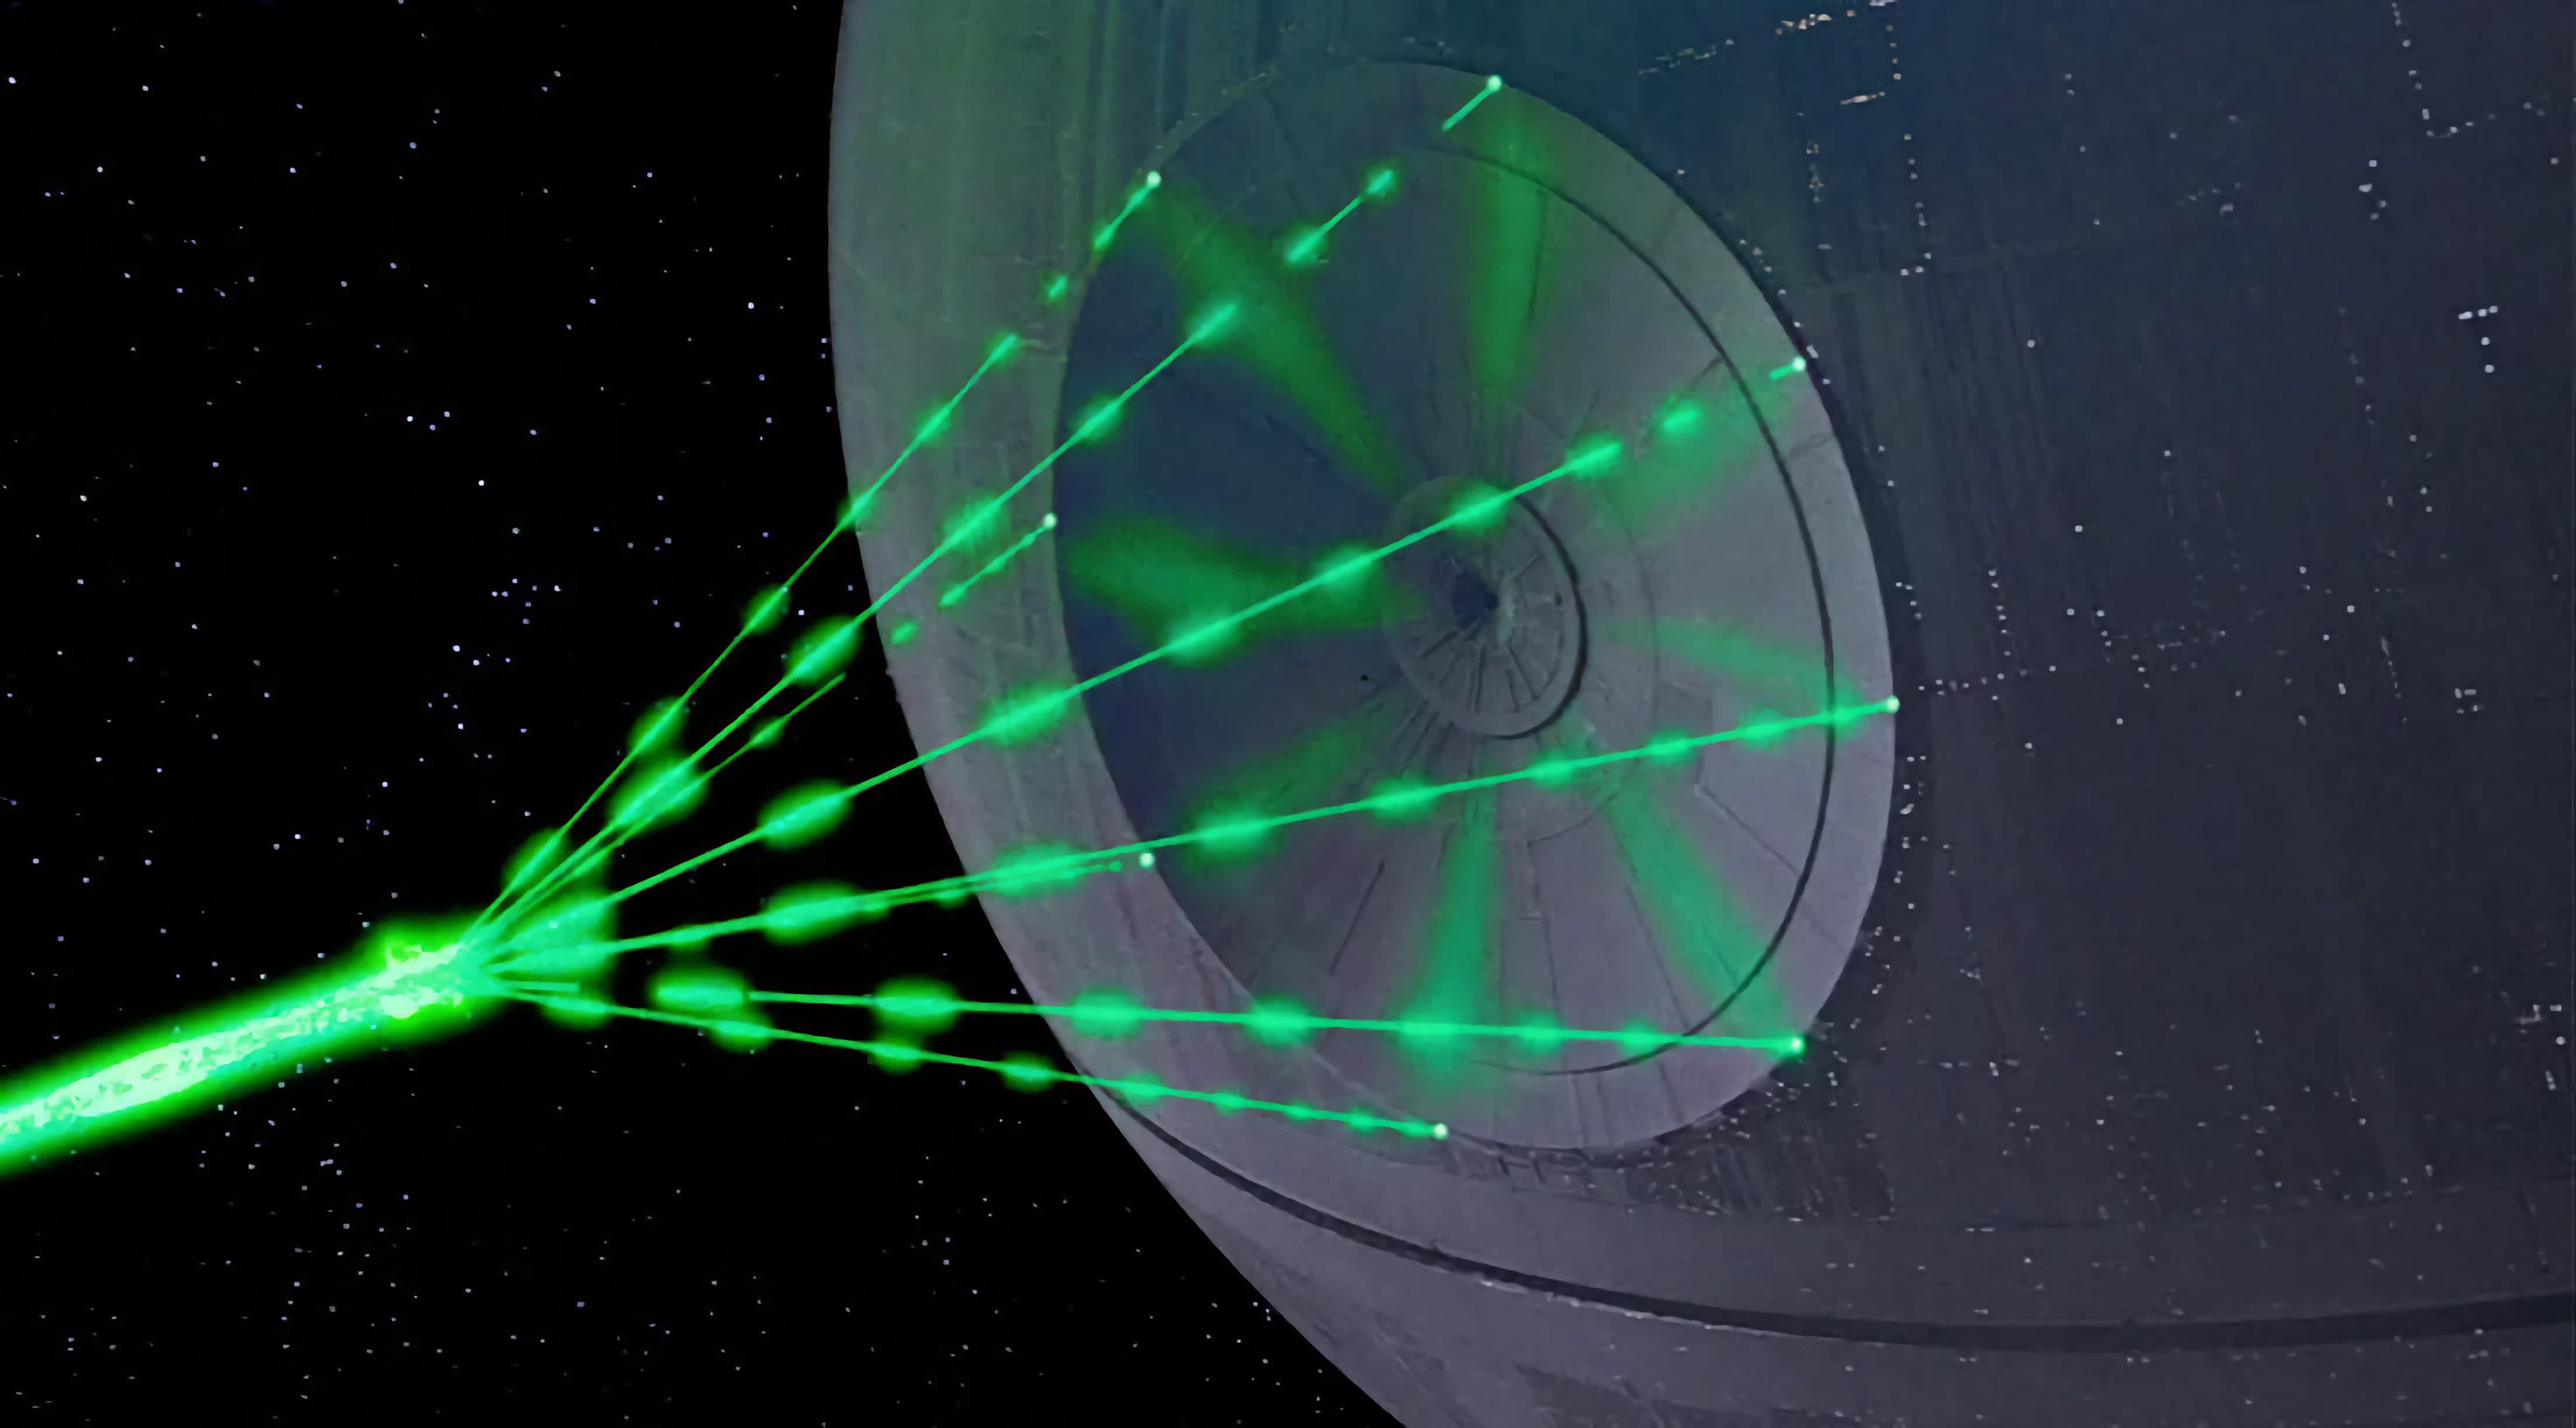 Star Wars Project in South Korea will use anti-aircraft laser weapons against drones